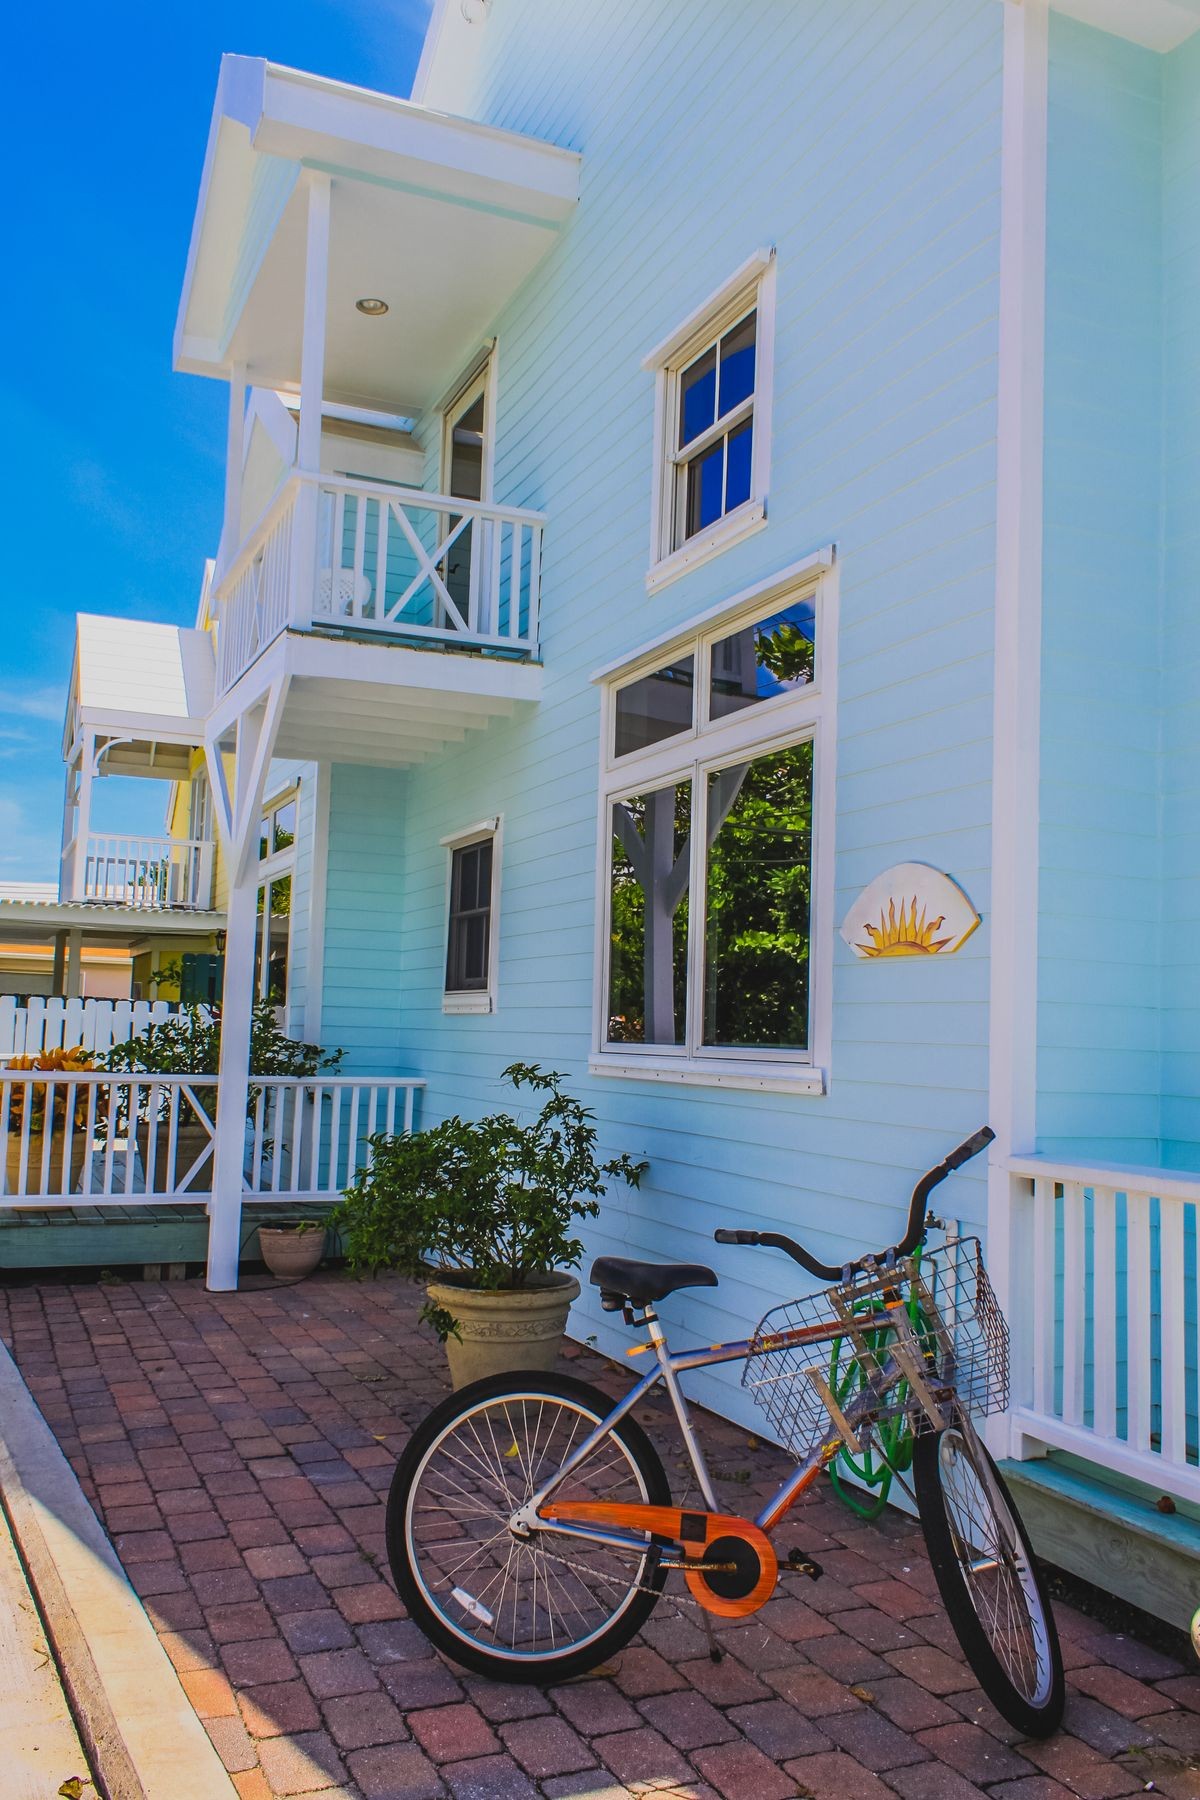 Colorful Caribbean Architecture, Caribbean house exterior with tropical plants and a bicycle. Elbow Cay, Hope Town, Abaco, The Bahama.